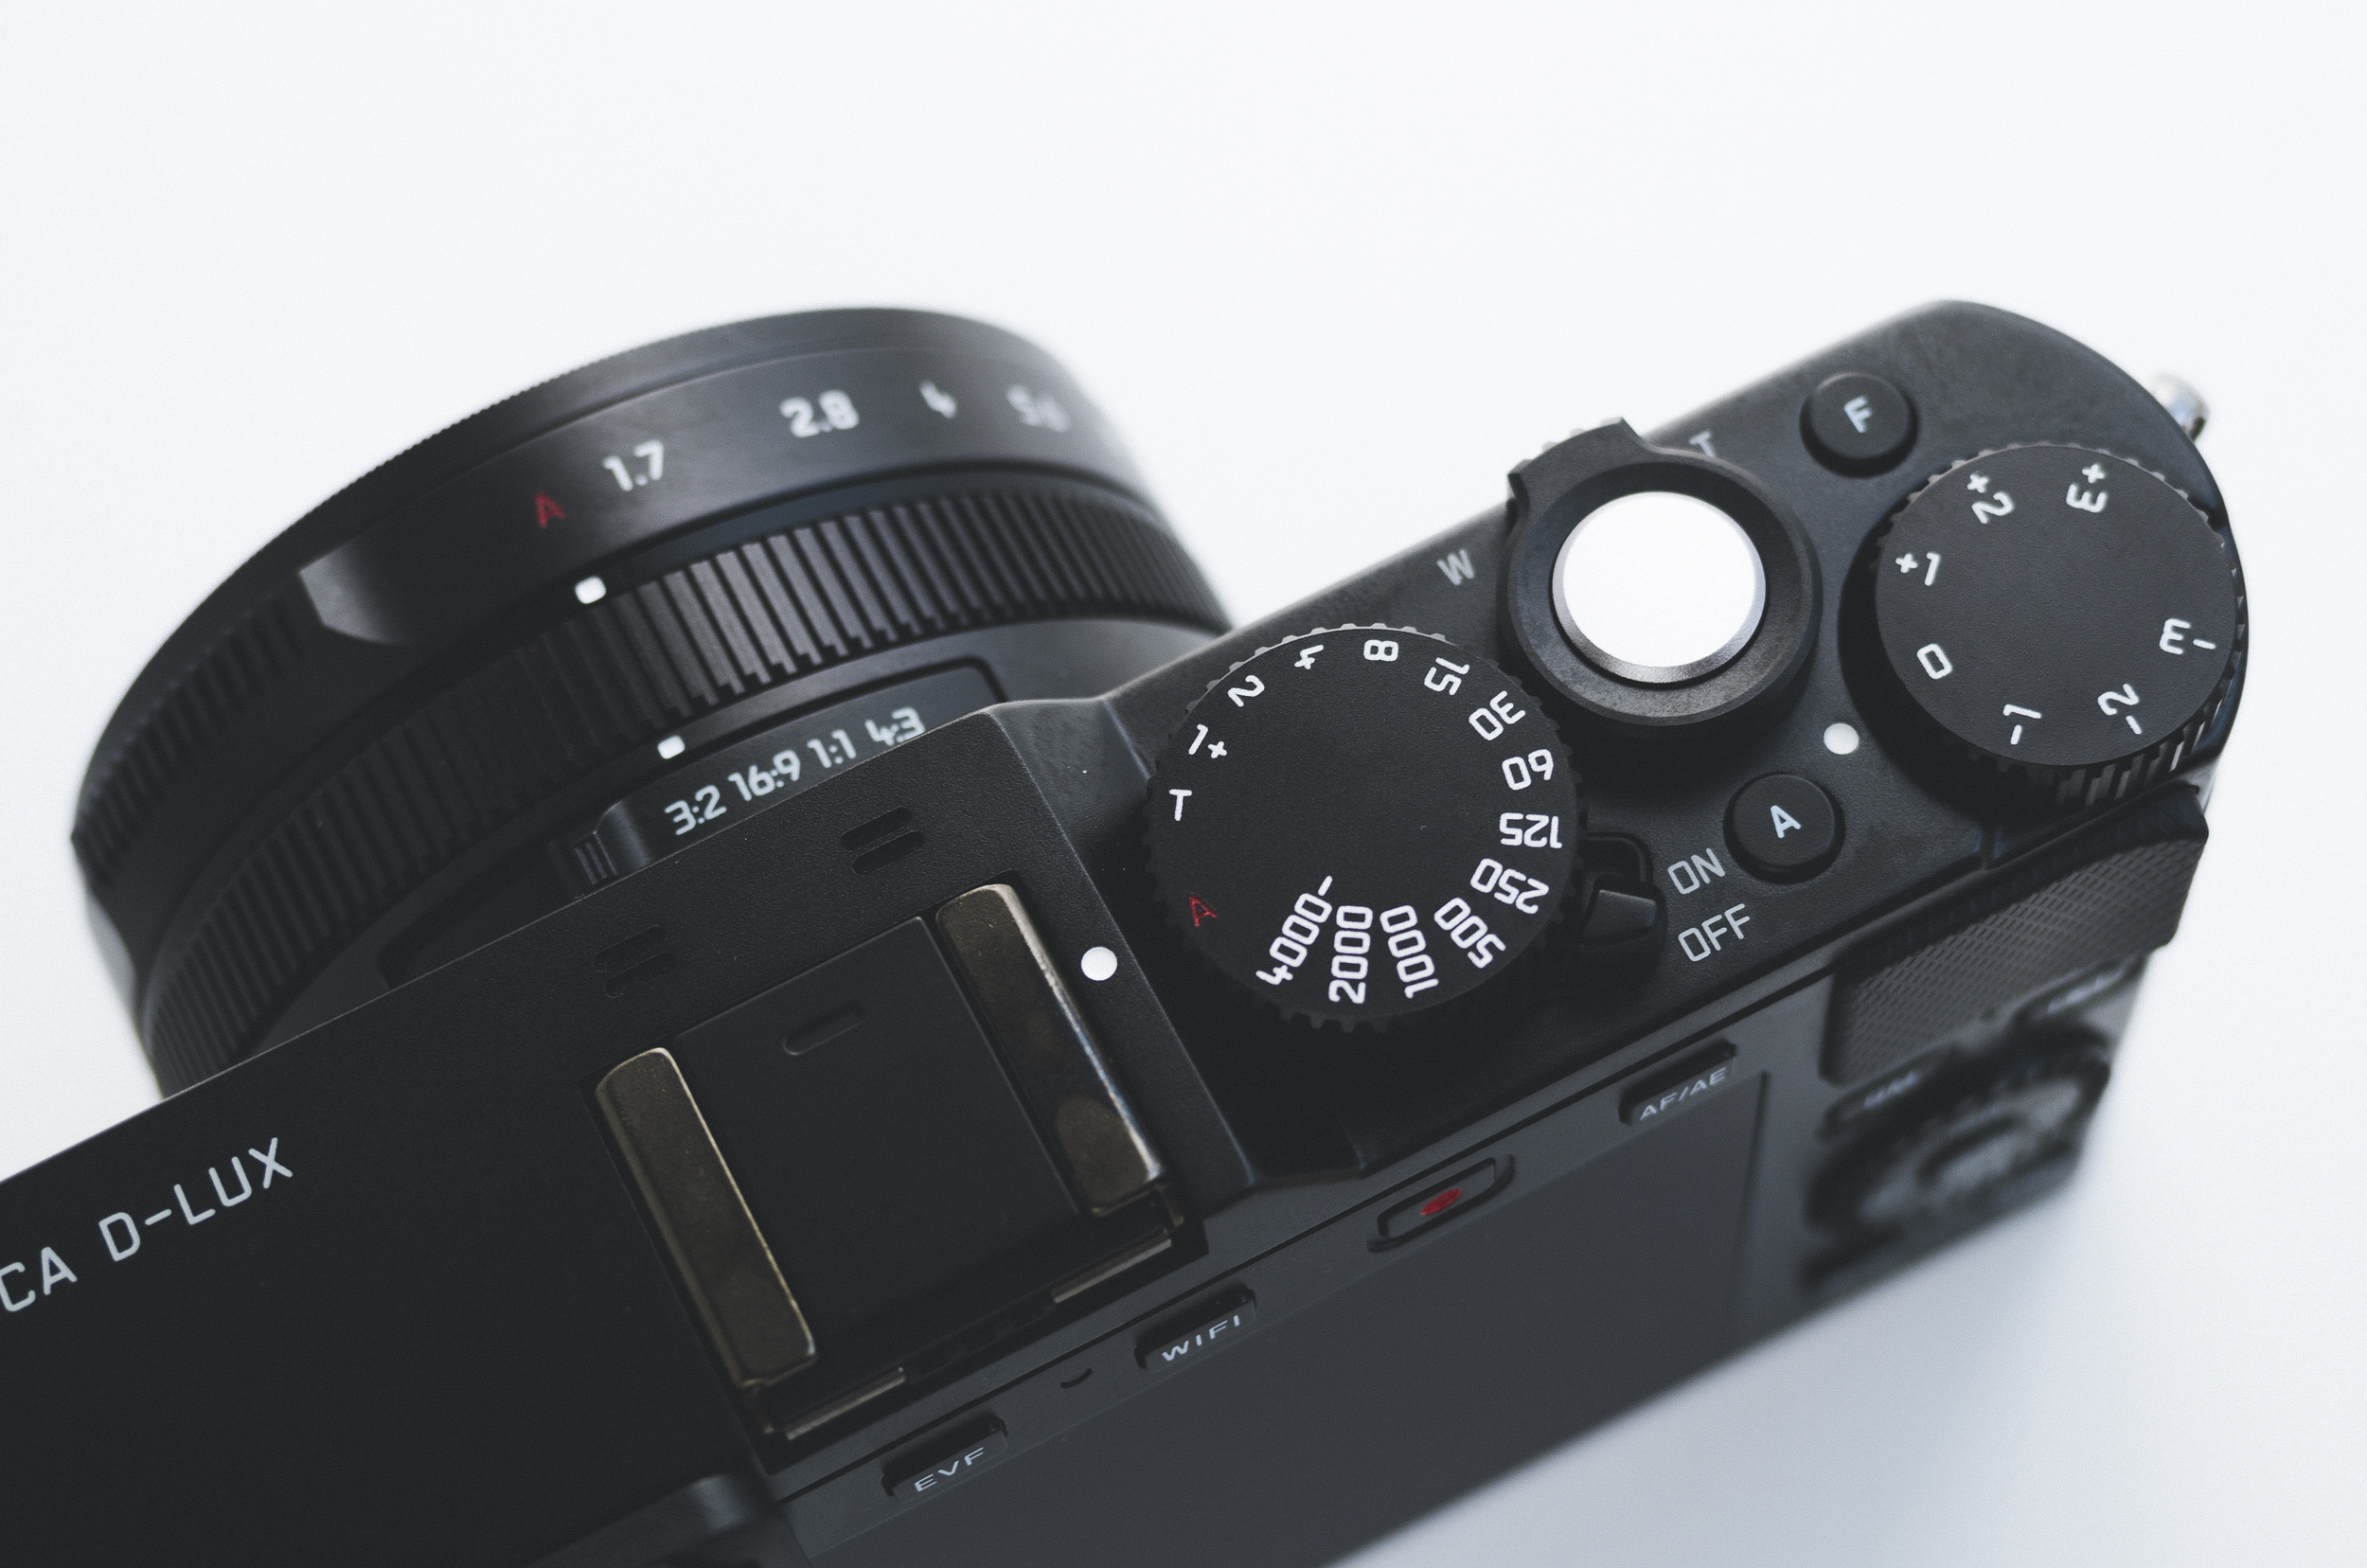 Sample Photos from Leica D-Lux (Typ 109) Camera